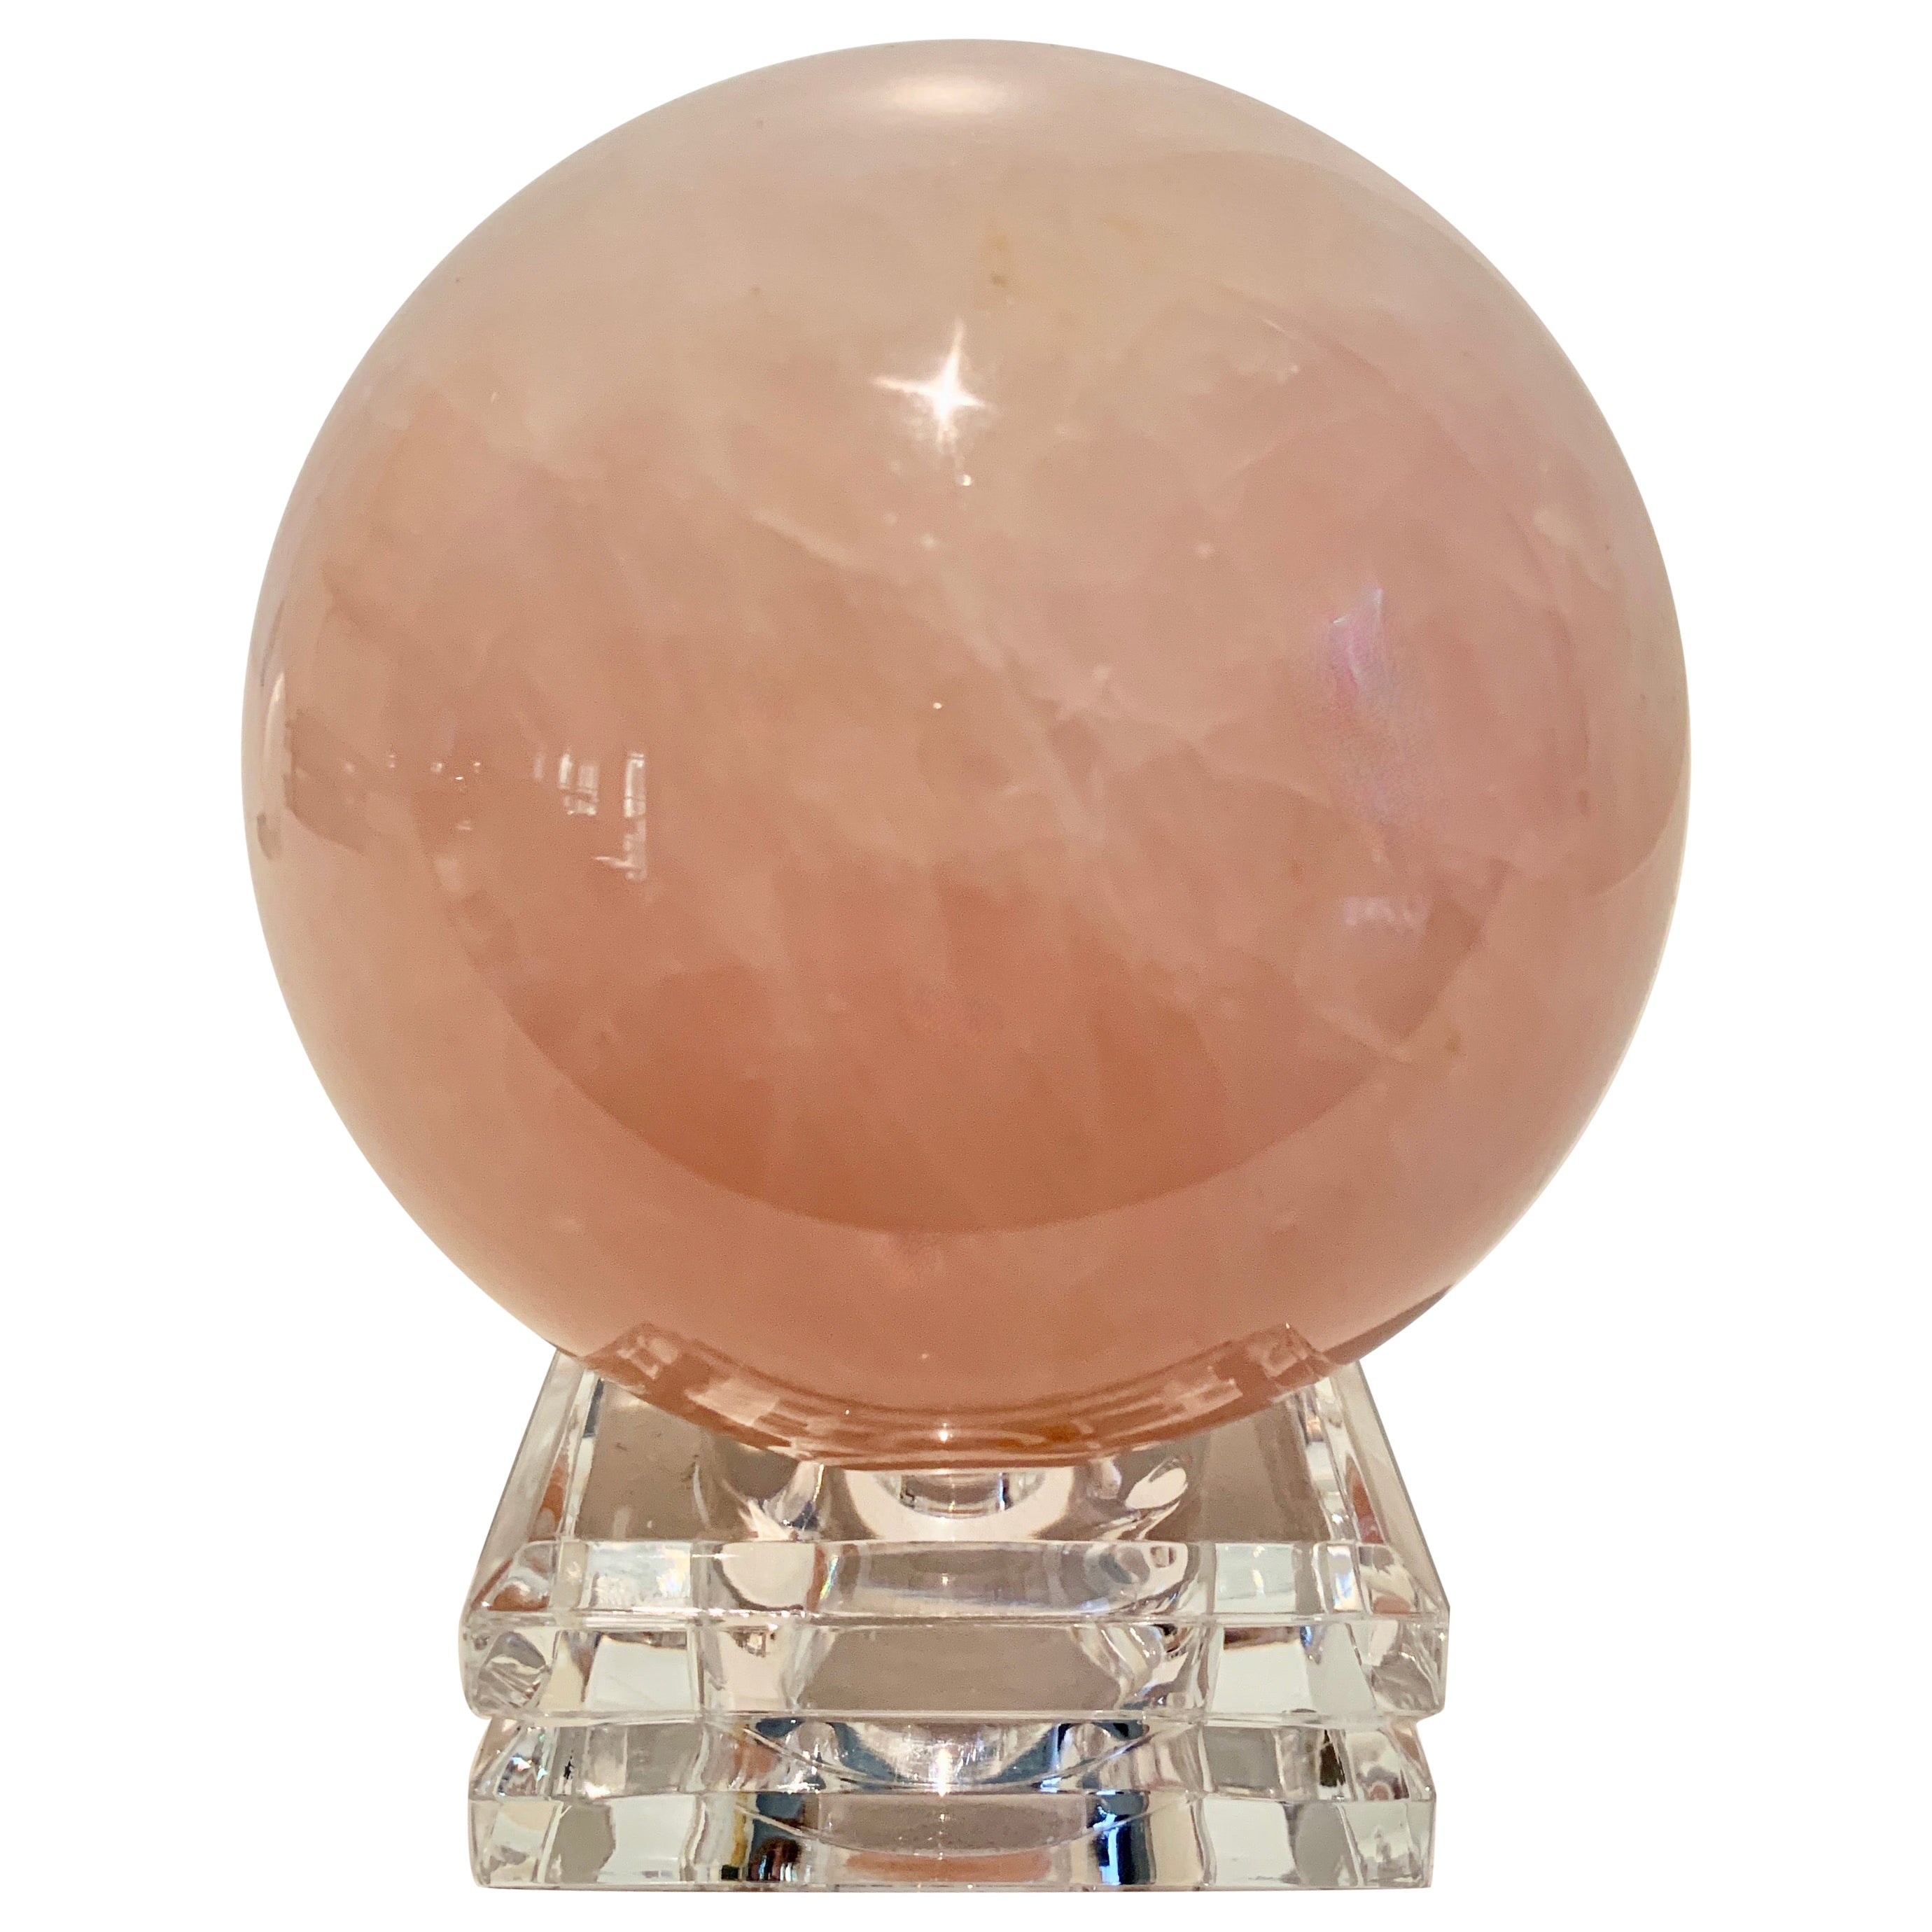 Pink Rock Crystal Sphere Paper Weight on Stand